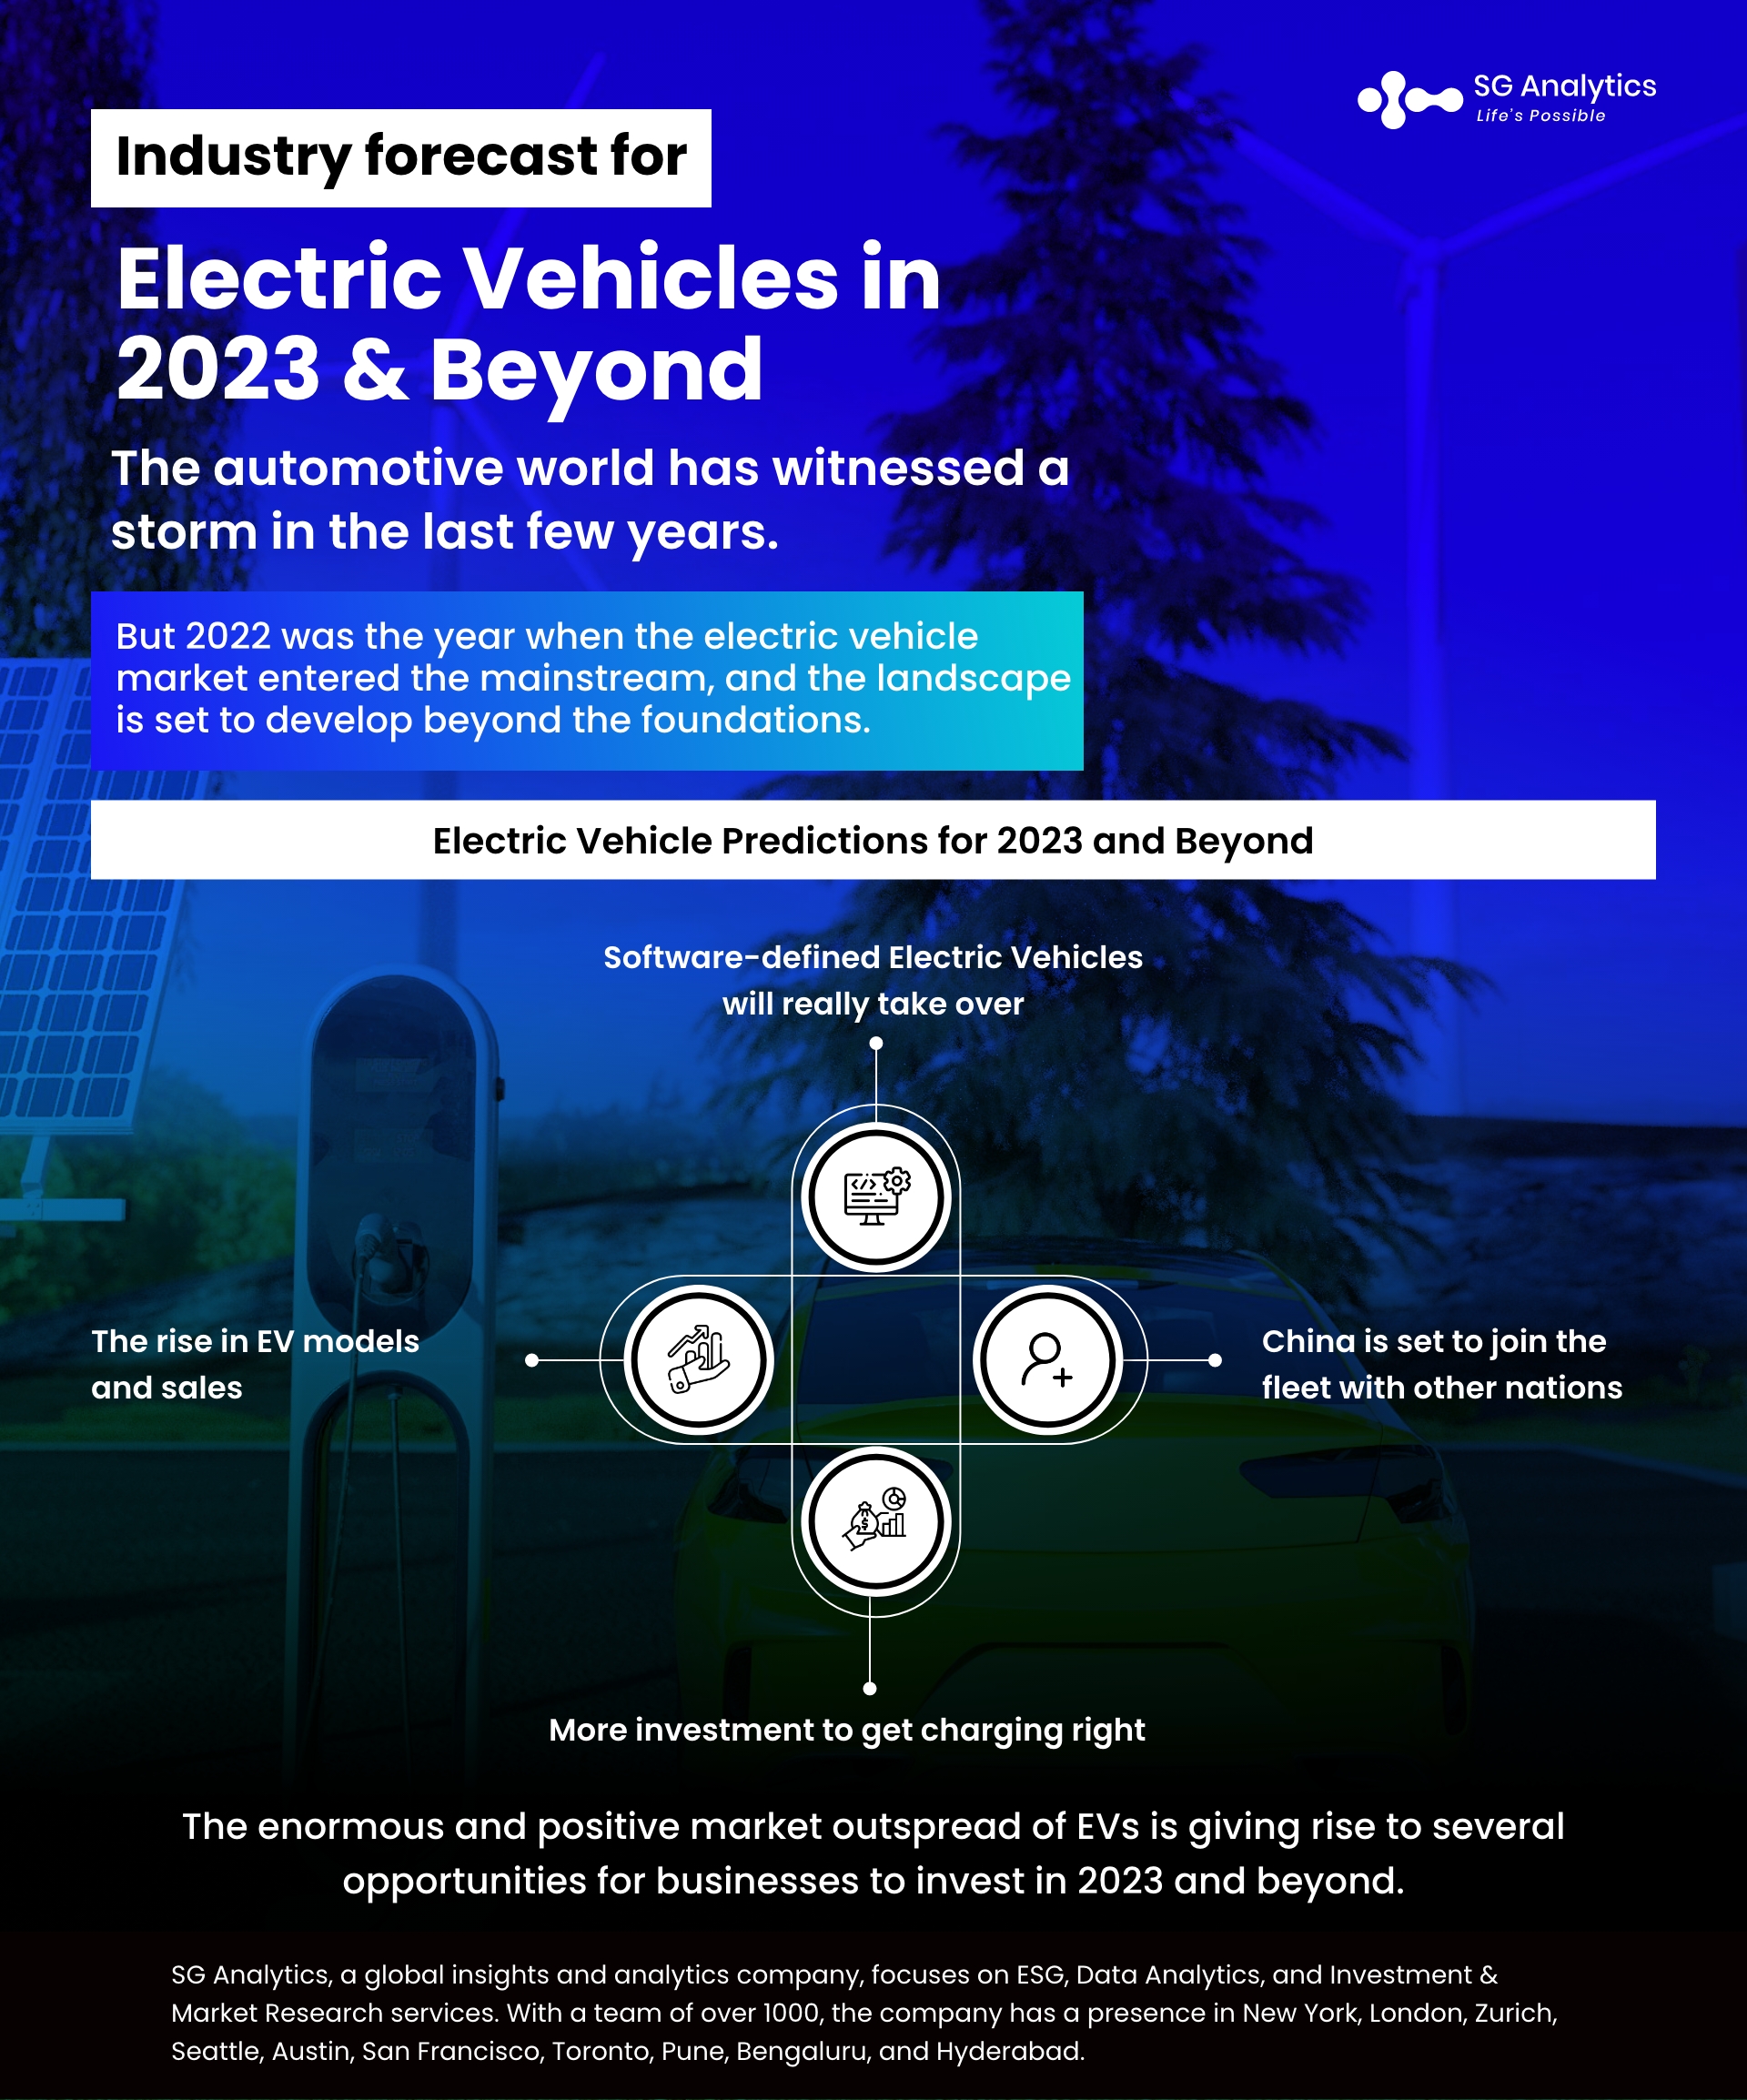 Predictions & Industry forecast for Electric Vehicles in 2023 and Beyond